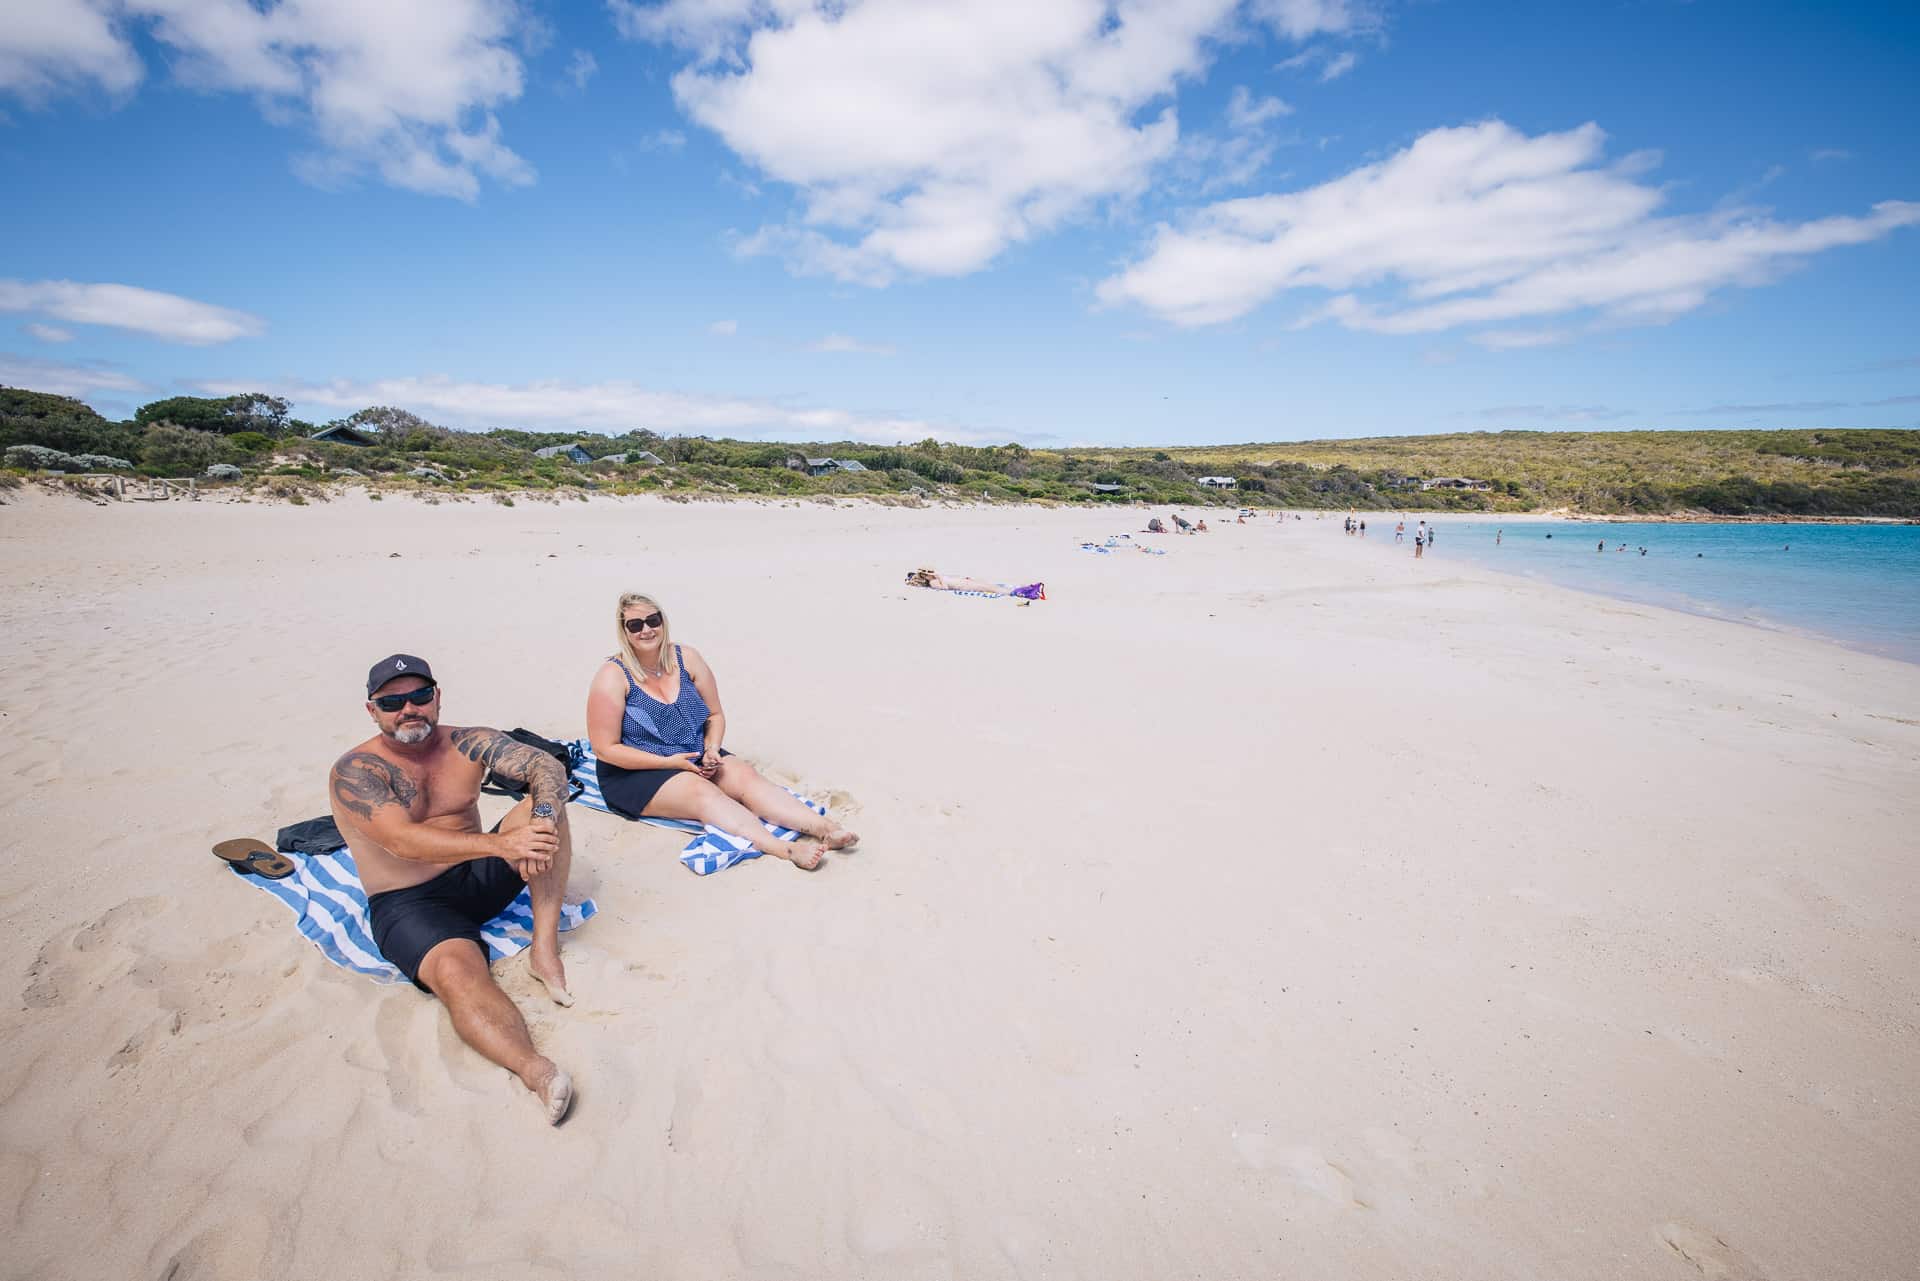 things to do in margaret river, what to do in margaret river, best things to do in margaret river, things to do margaret river, bunker bay